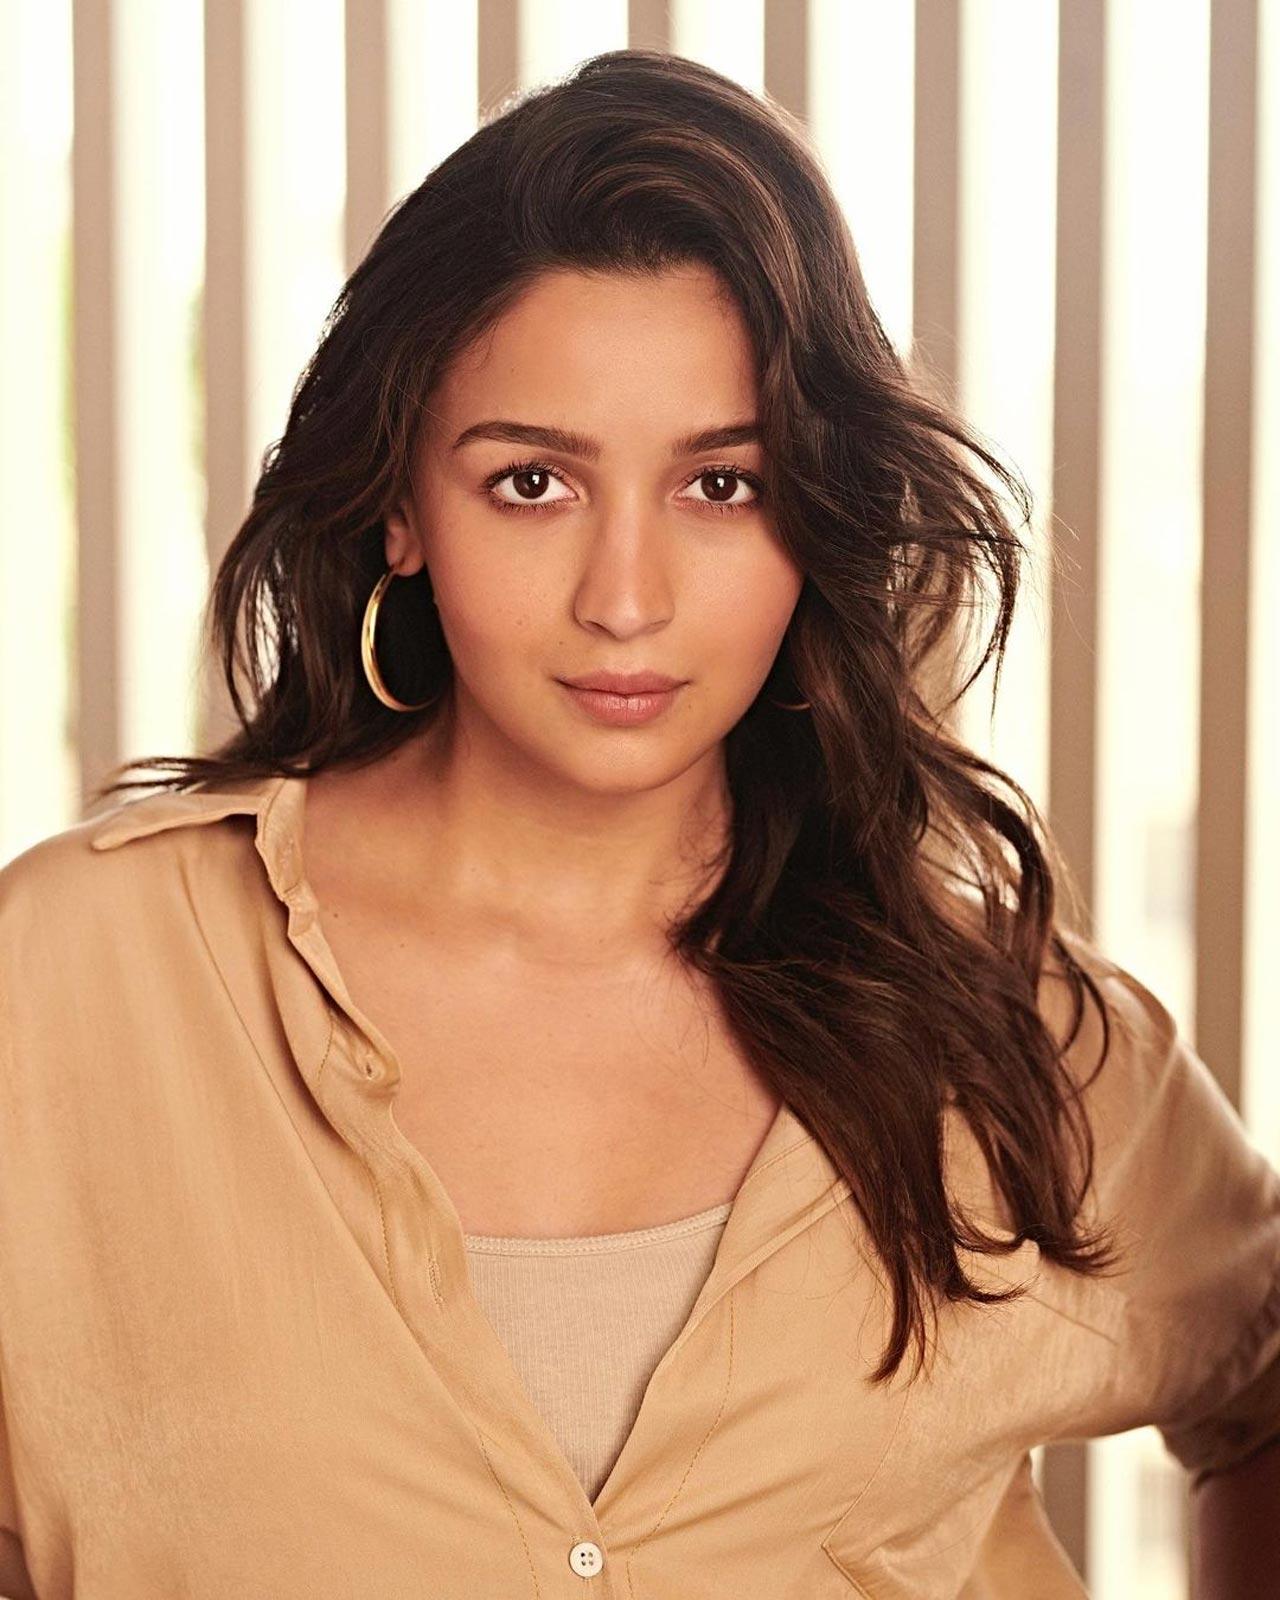 Meanwhile, Alia announced that she is expecting her first child with Ranbir in June this year. The 'Brahmastra' couple tied their knot on April 14, 2022, after dating for many years at Ranbir's Mumbai residence in an intimate ceremony. Just after two months of their marriage, the couple treated their fans with such a big surprise